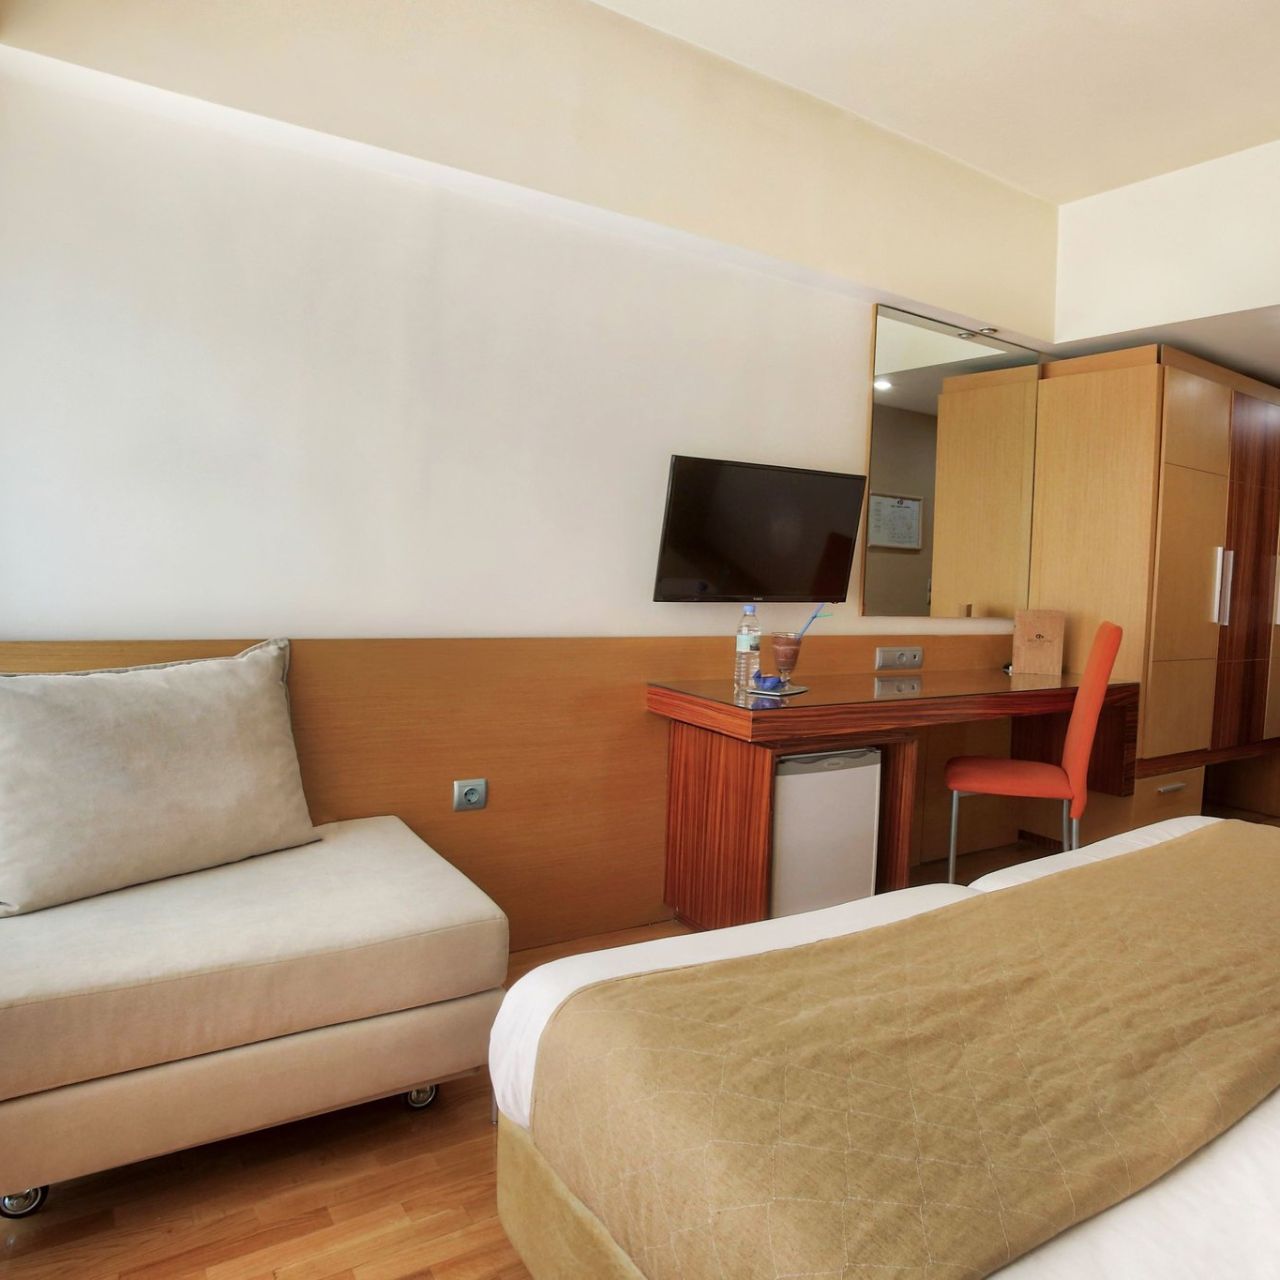 Capsis Astoria Hotel - Heraklion - Great prices at HOTEL INFO